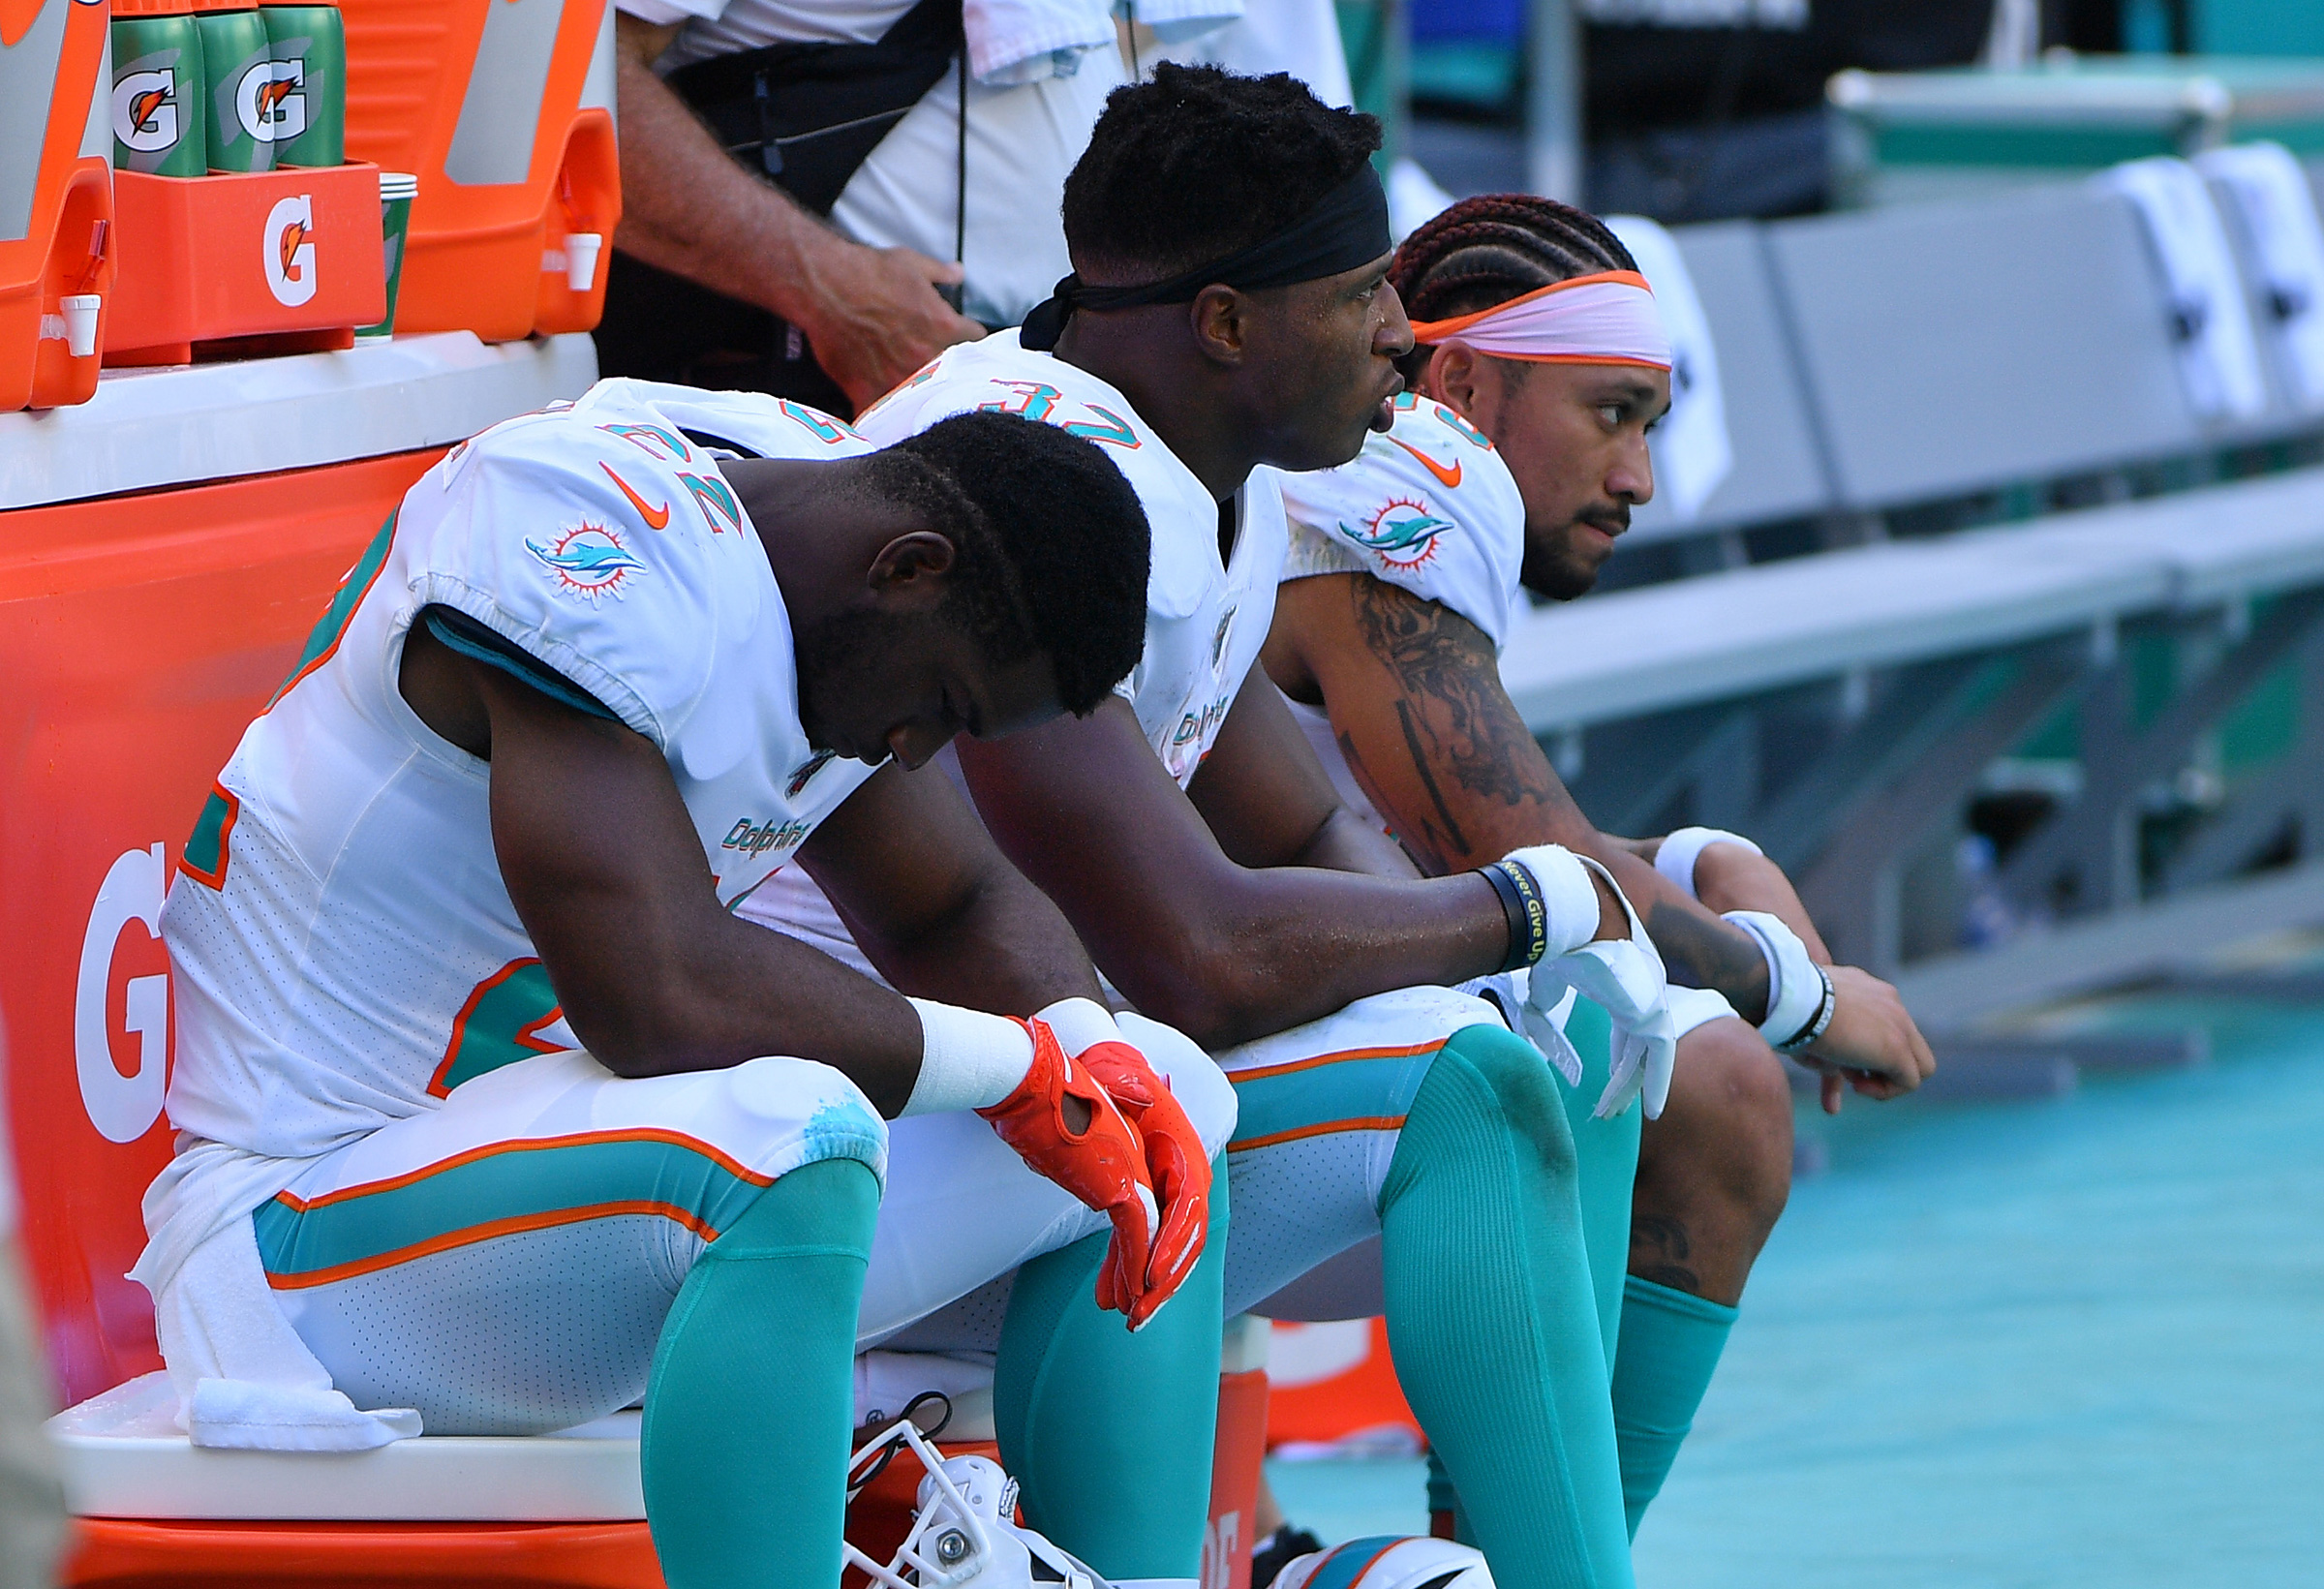 Miami players take in a 59-10 loss to Baltimore on Sept. 8